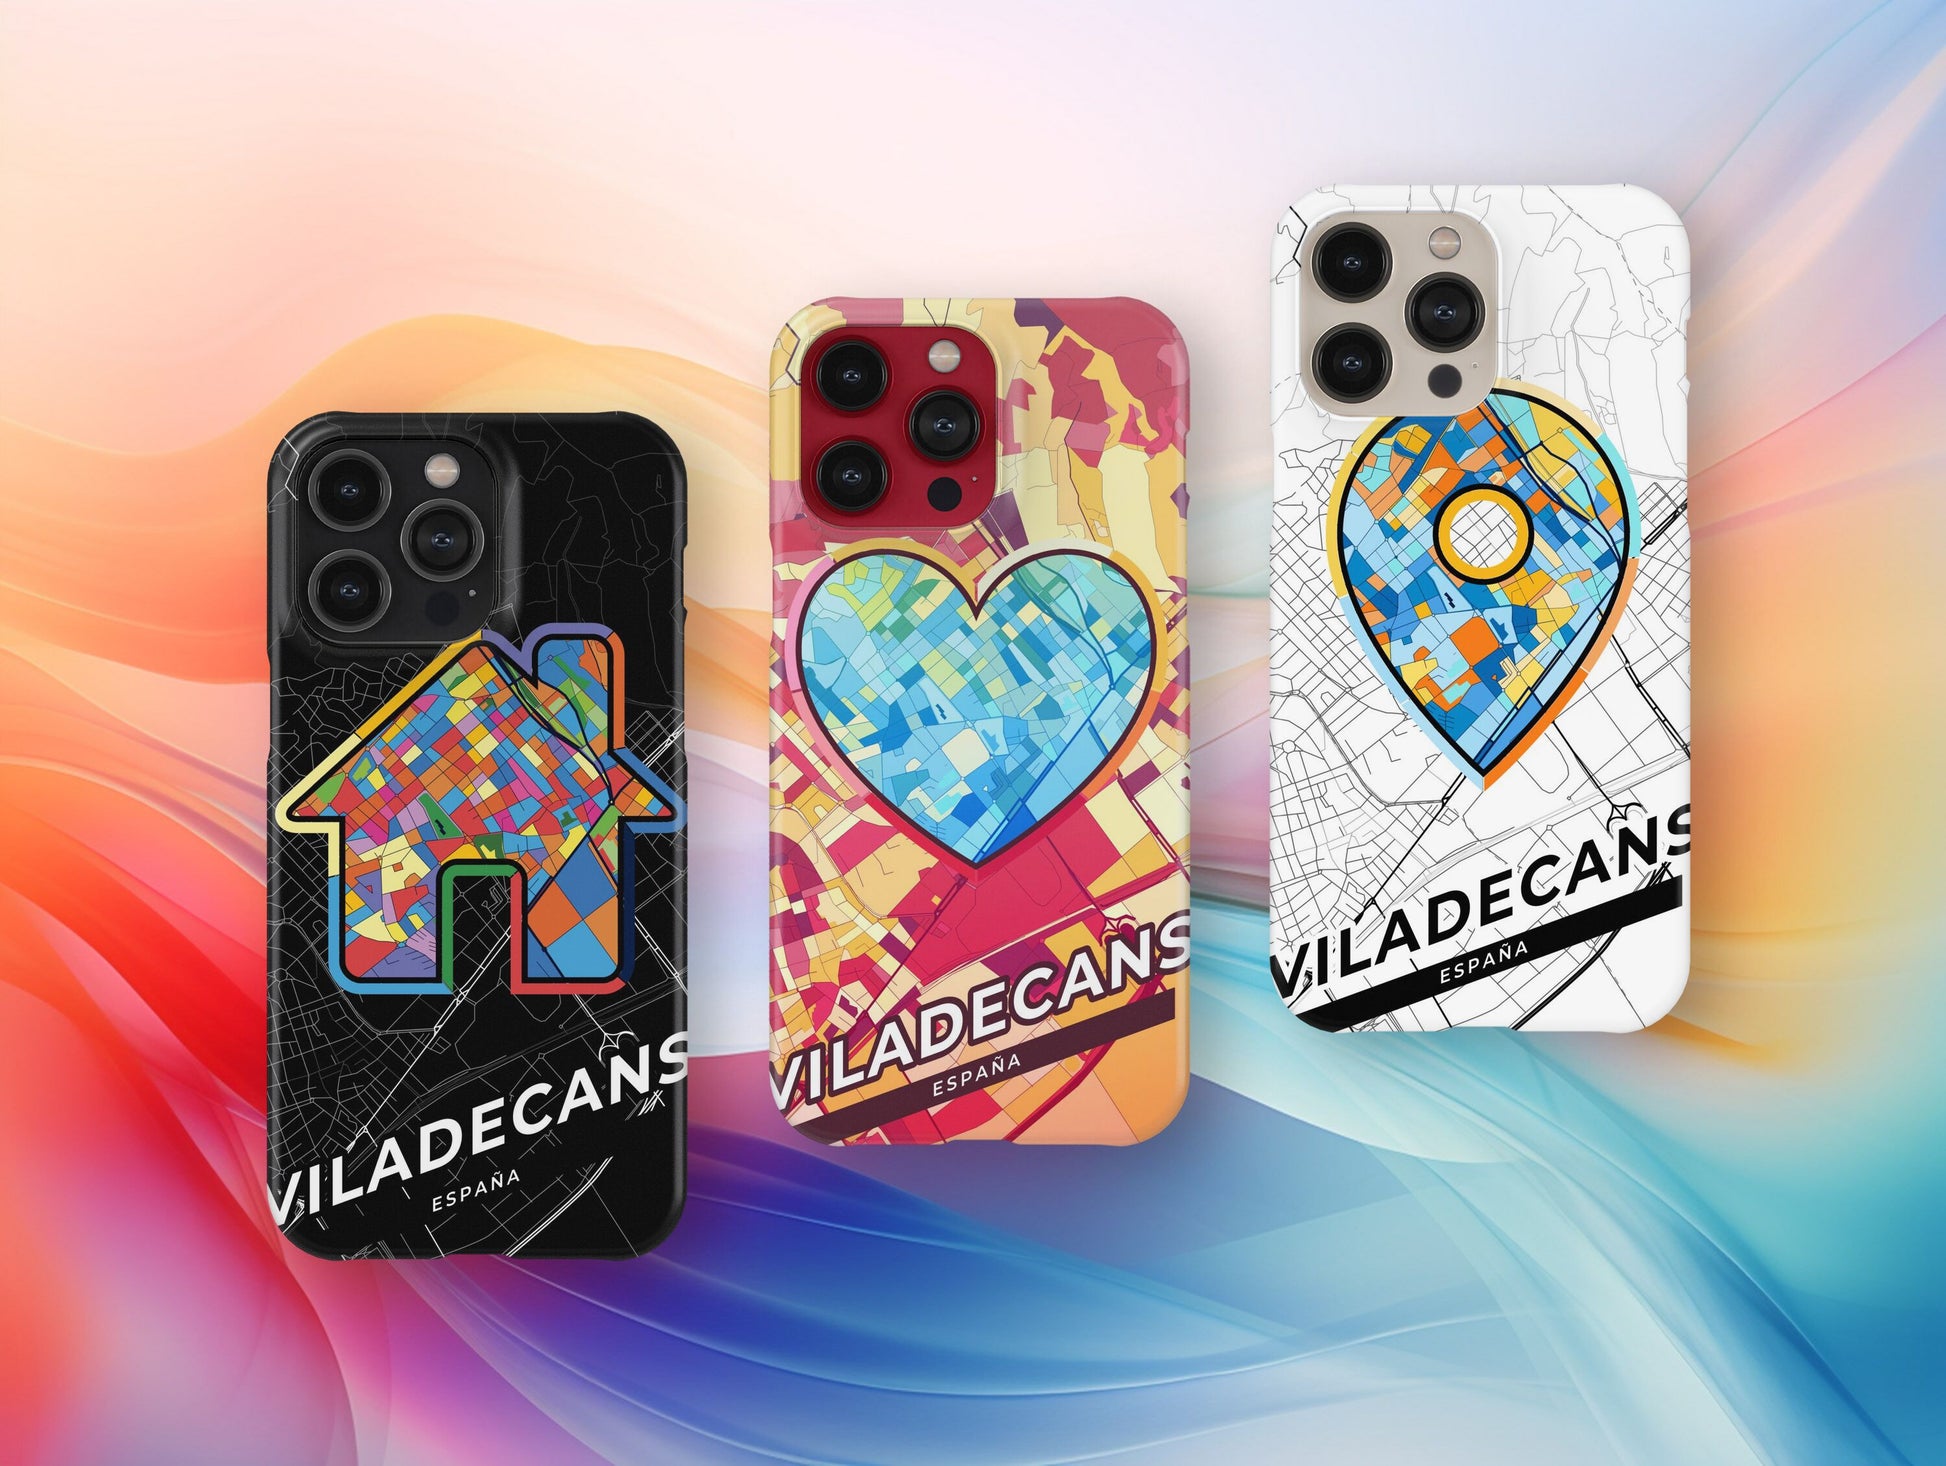 Viladecans Spain slim phone case with colorful icon